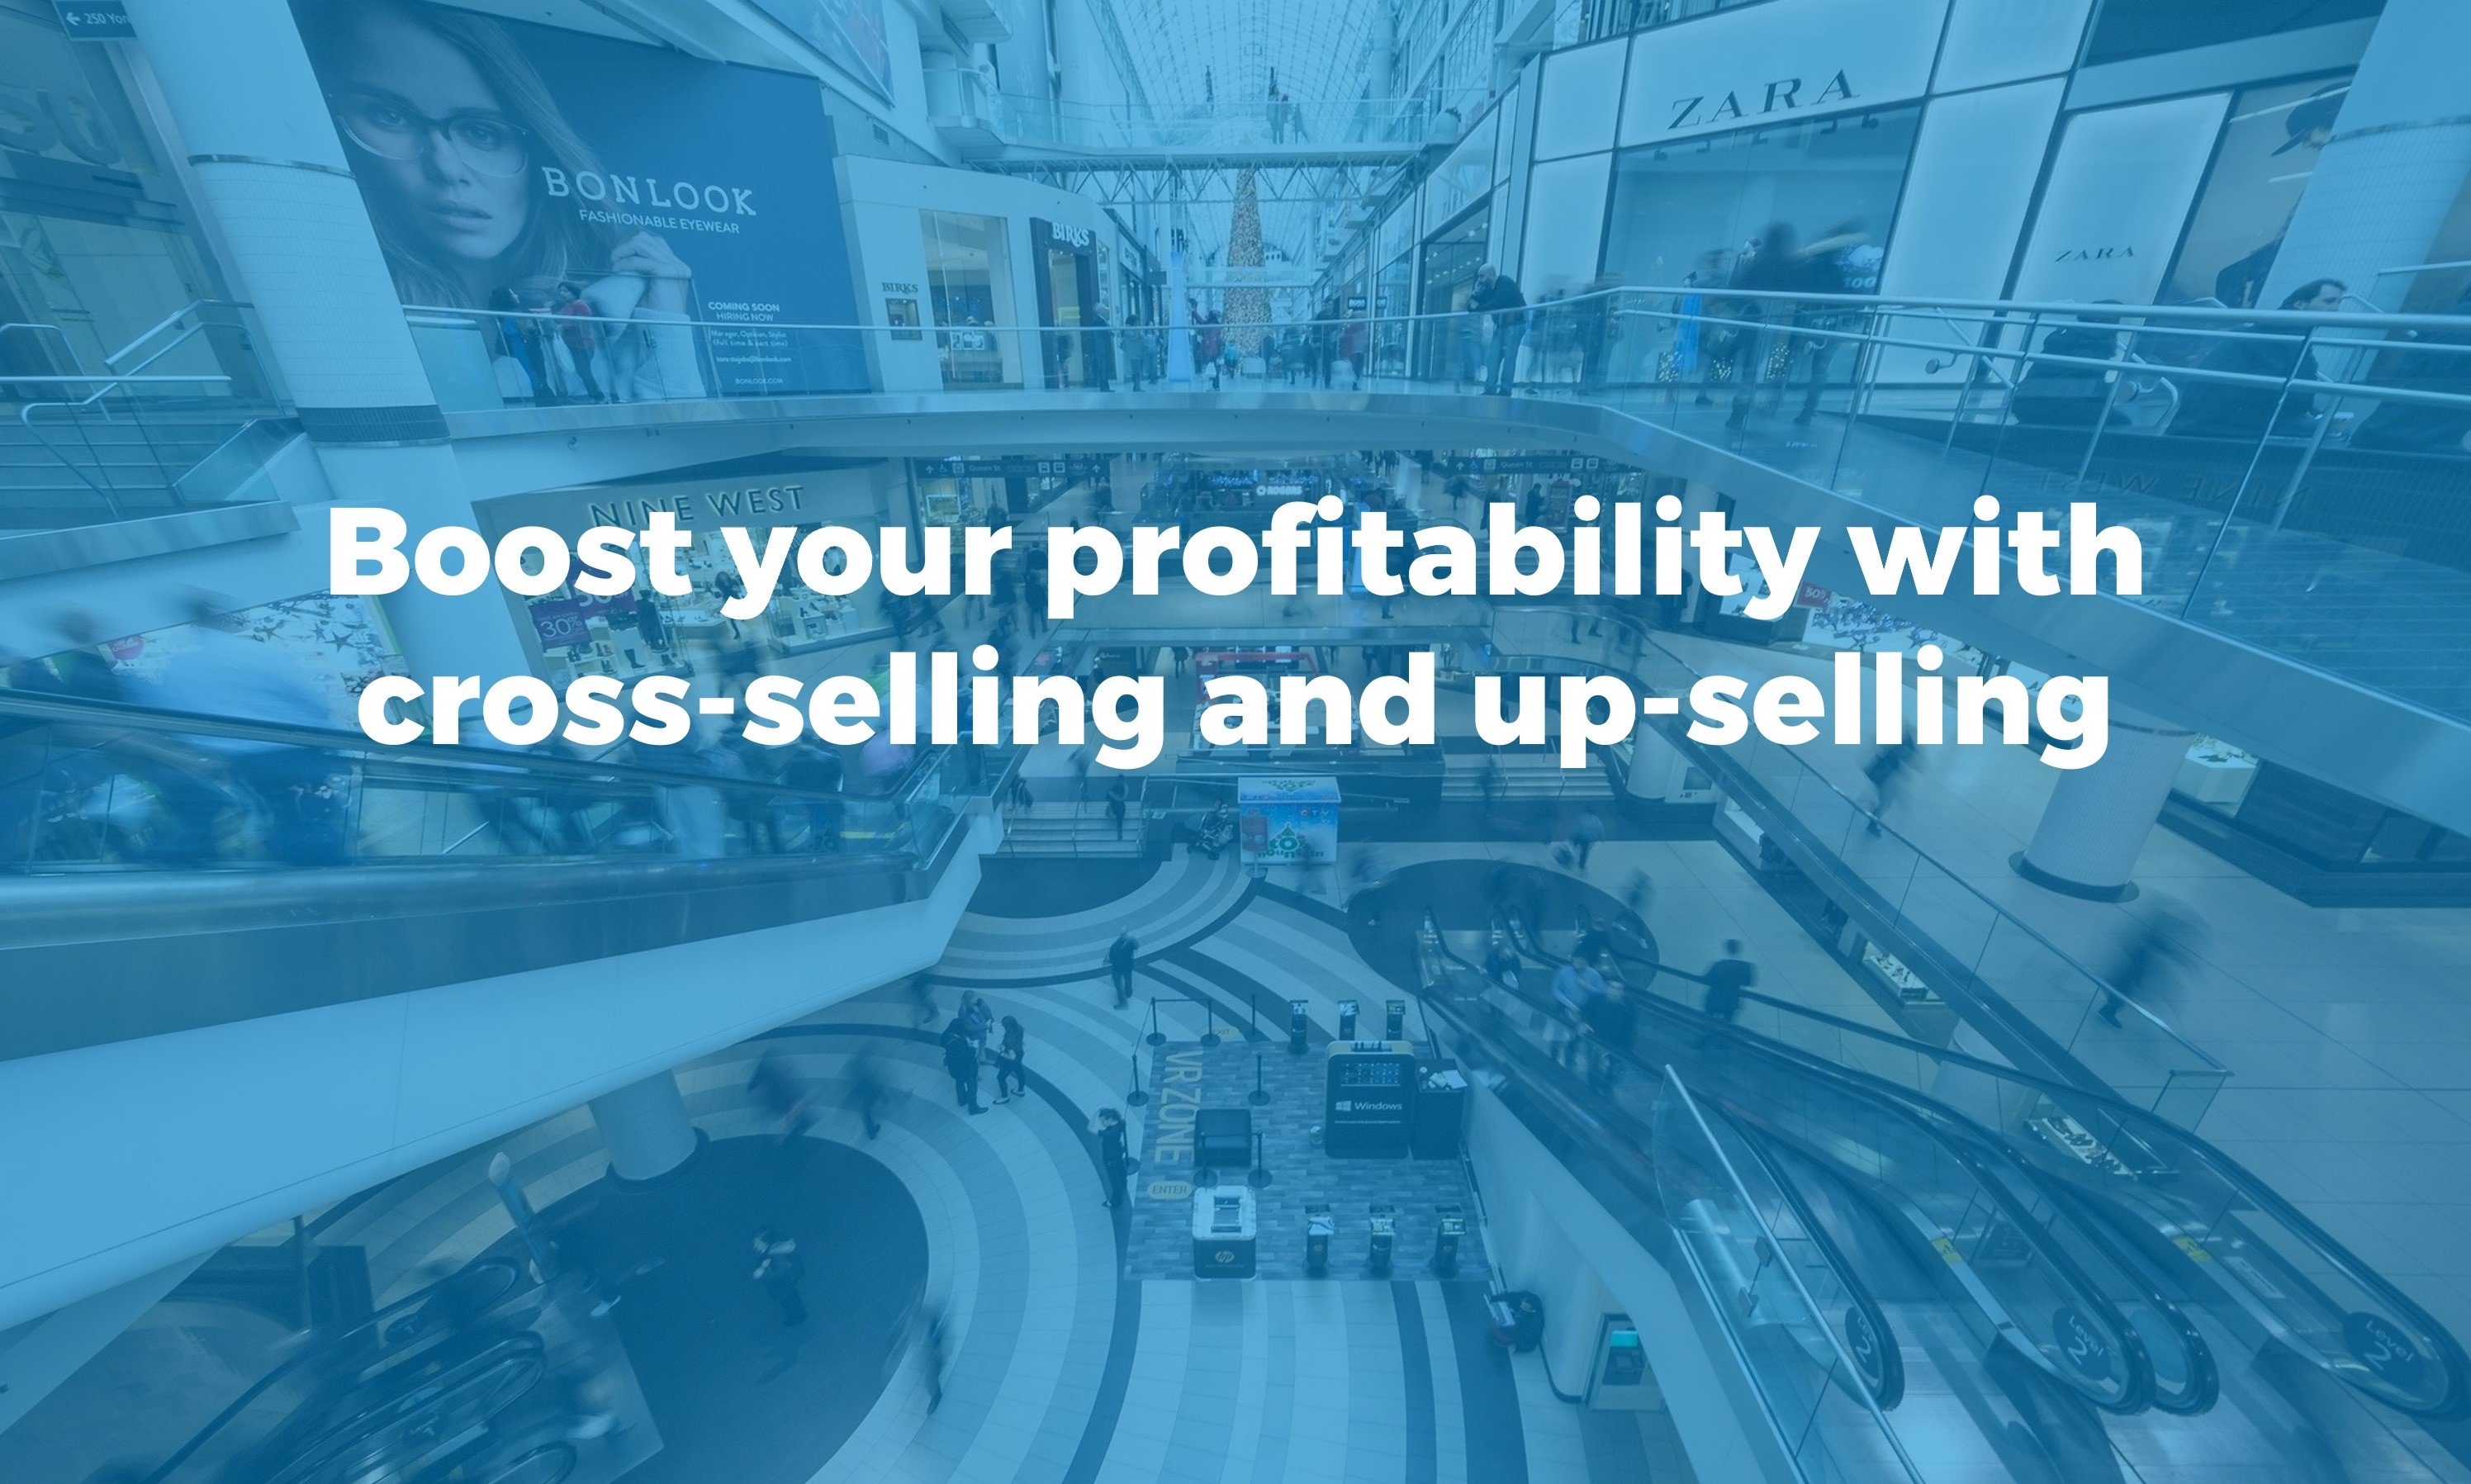 Cross-selling and Up-selling: How Can They Boost Your Income?